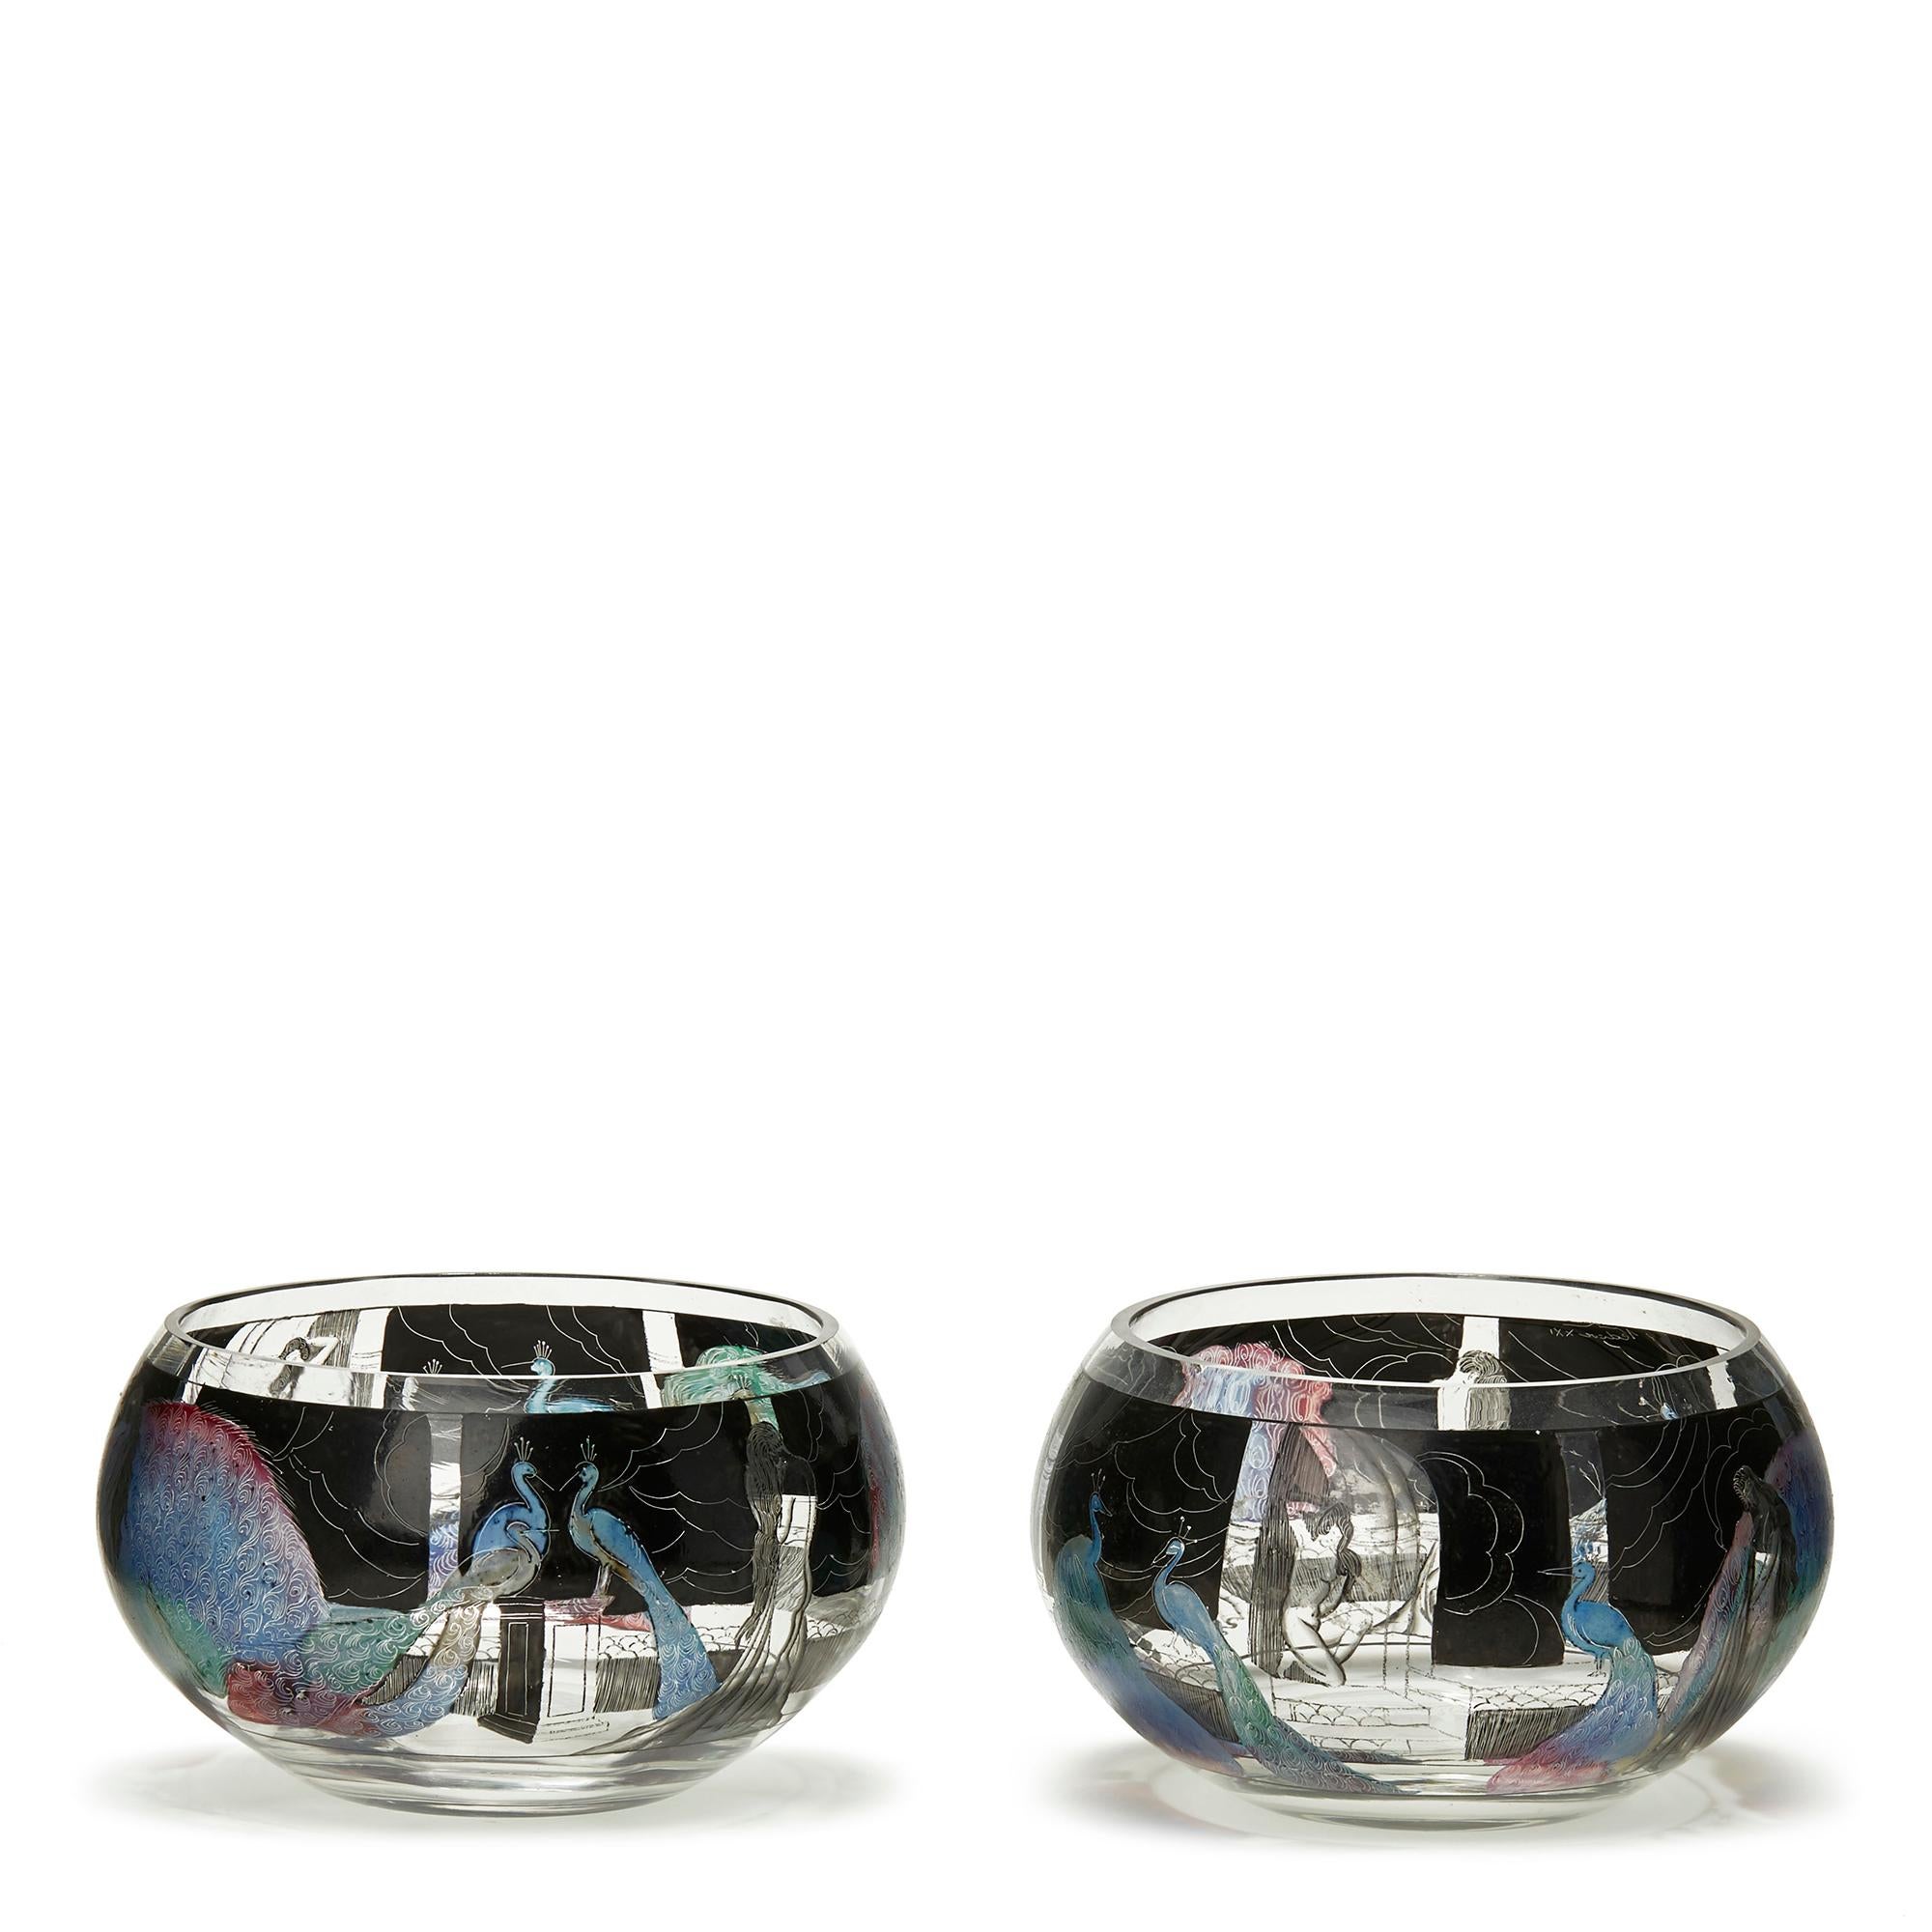 A stylish pair of Art Deco Vedar clear glass bowls hand enamelled with nude female figures and peacocks within a garden setting coloured and set within a black continuous landscape ground. The bowls were made by Vetri d'Arte (Vedar) which was